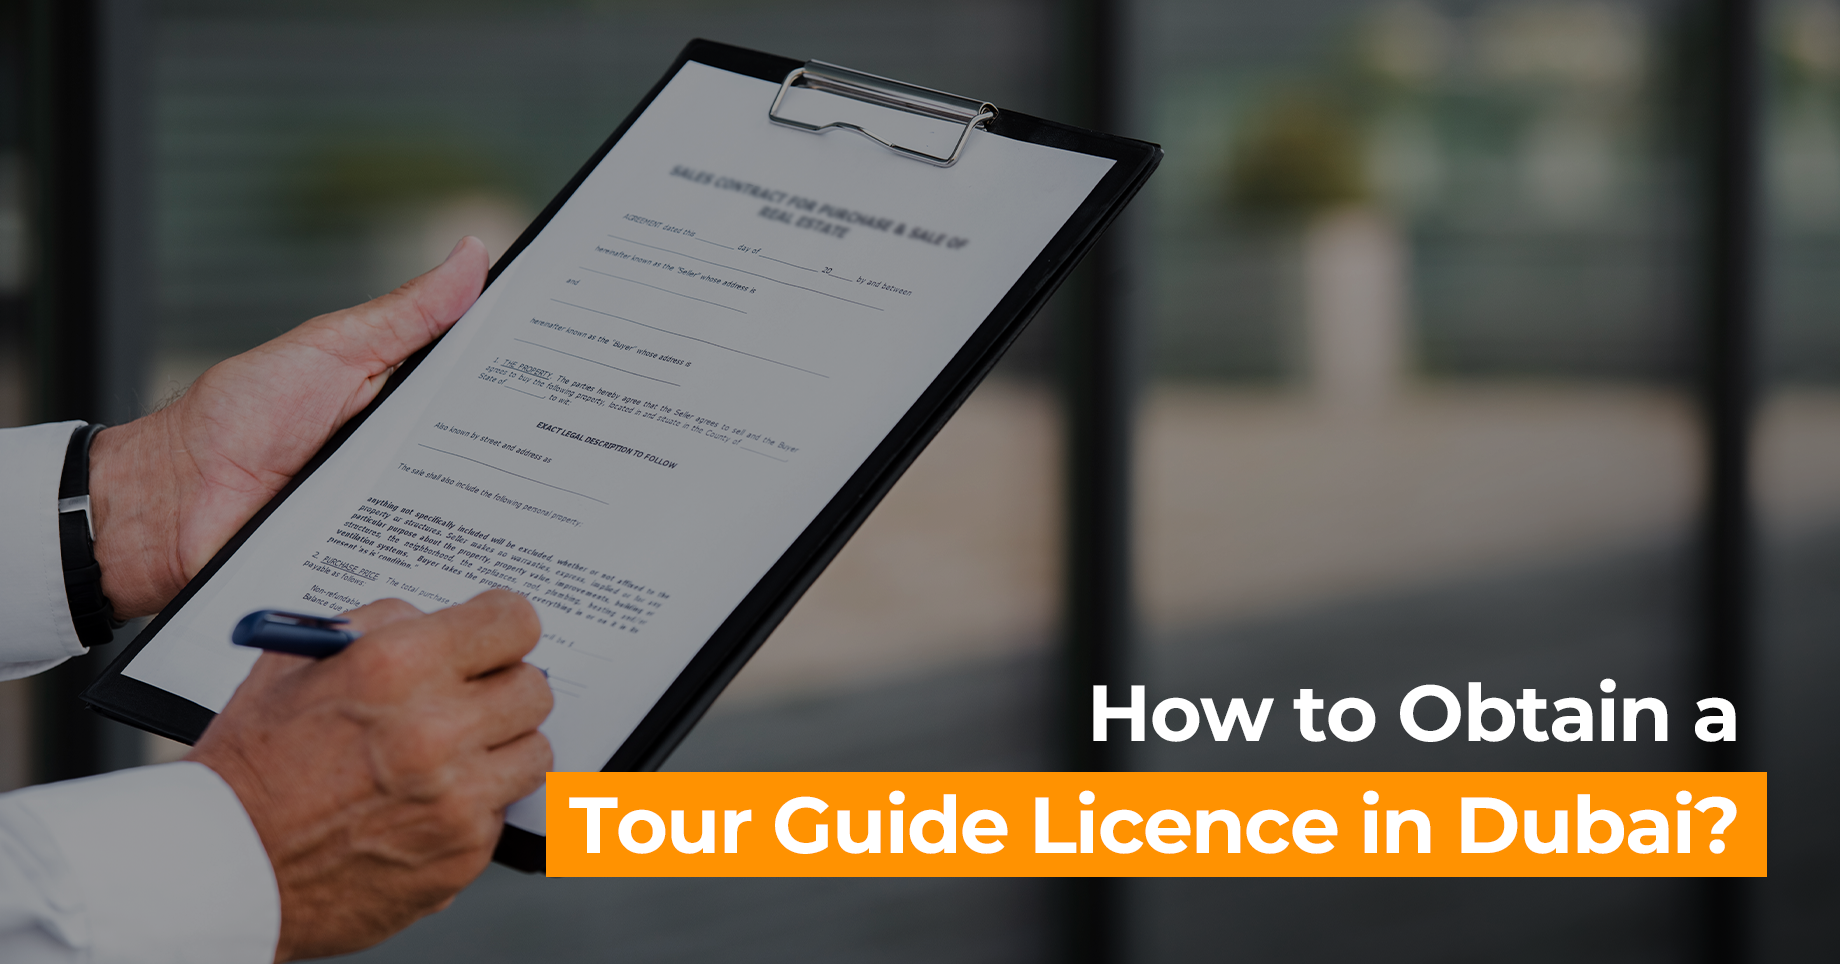 How to Obtain a Tour Guide Licence in Dubai?